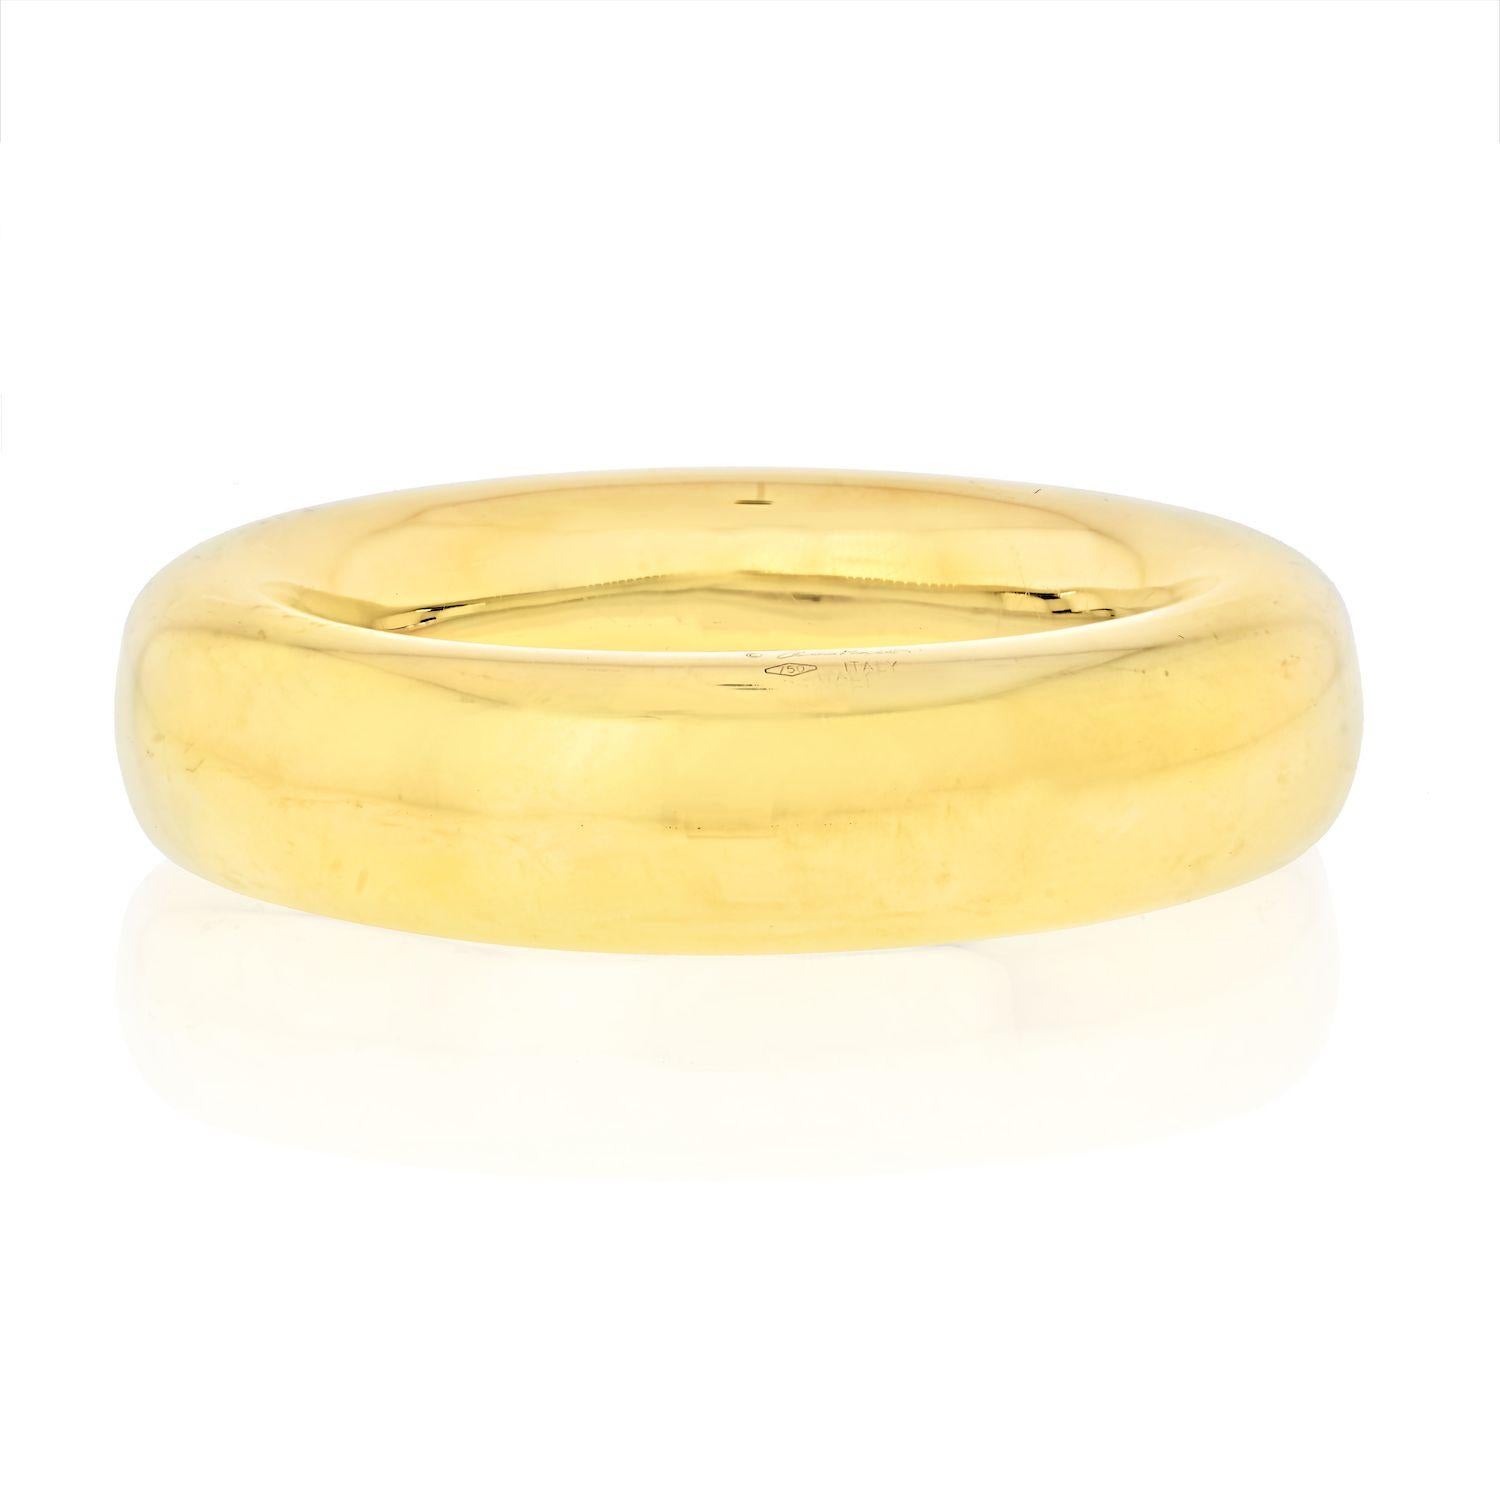 Sculptural simplicity. Big and beautiful Doughnut oval bangle bracelet. Made by Elsa Peretti c.1981 for TIFFANY & CO. Heavy gauge 18K yellow gold. Effortlessly chic. Feels and looks like liquid gold. For a medium to large wrist.
Width: 2.3cm
Wrist